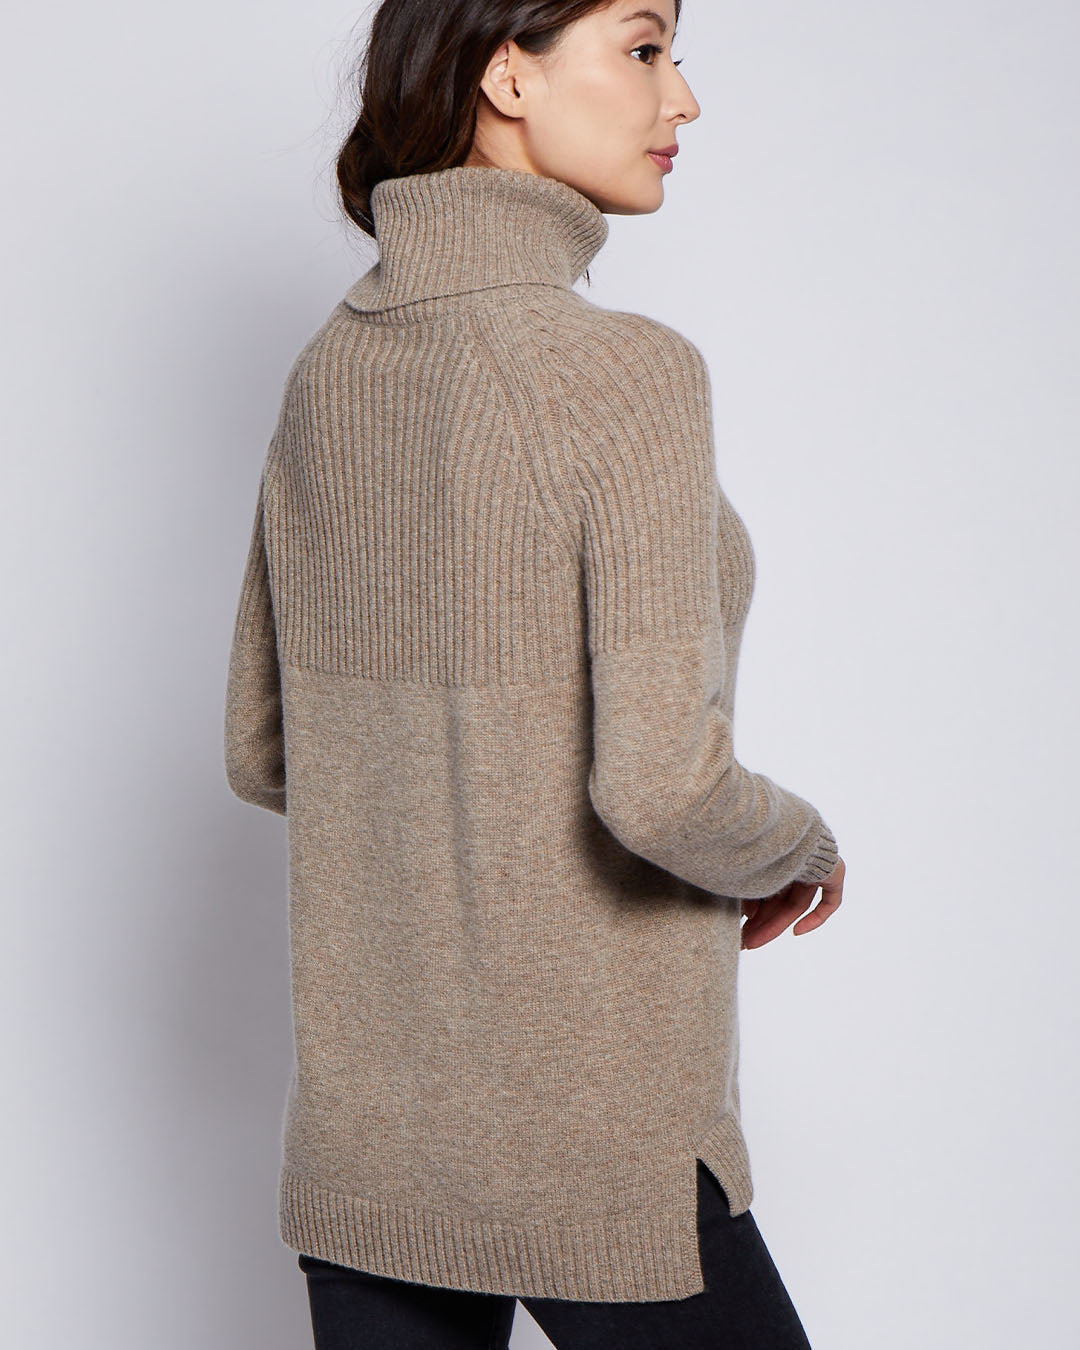 Our Famous Cashmere Ribbed Turtleneck Sweater